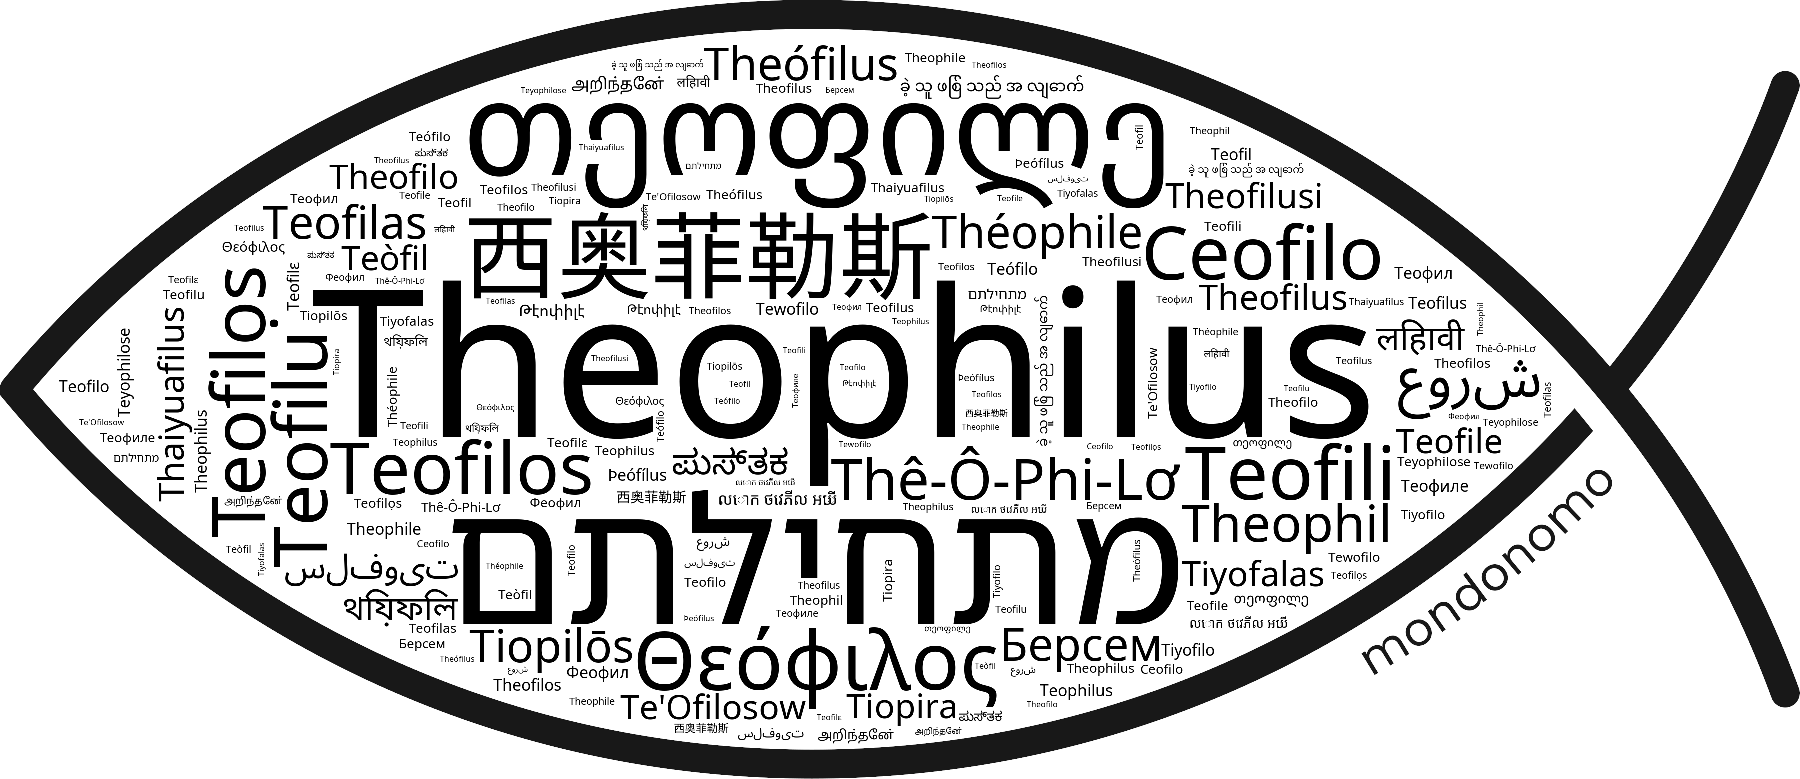 Name Theophilus in the world's Bibles